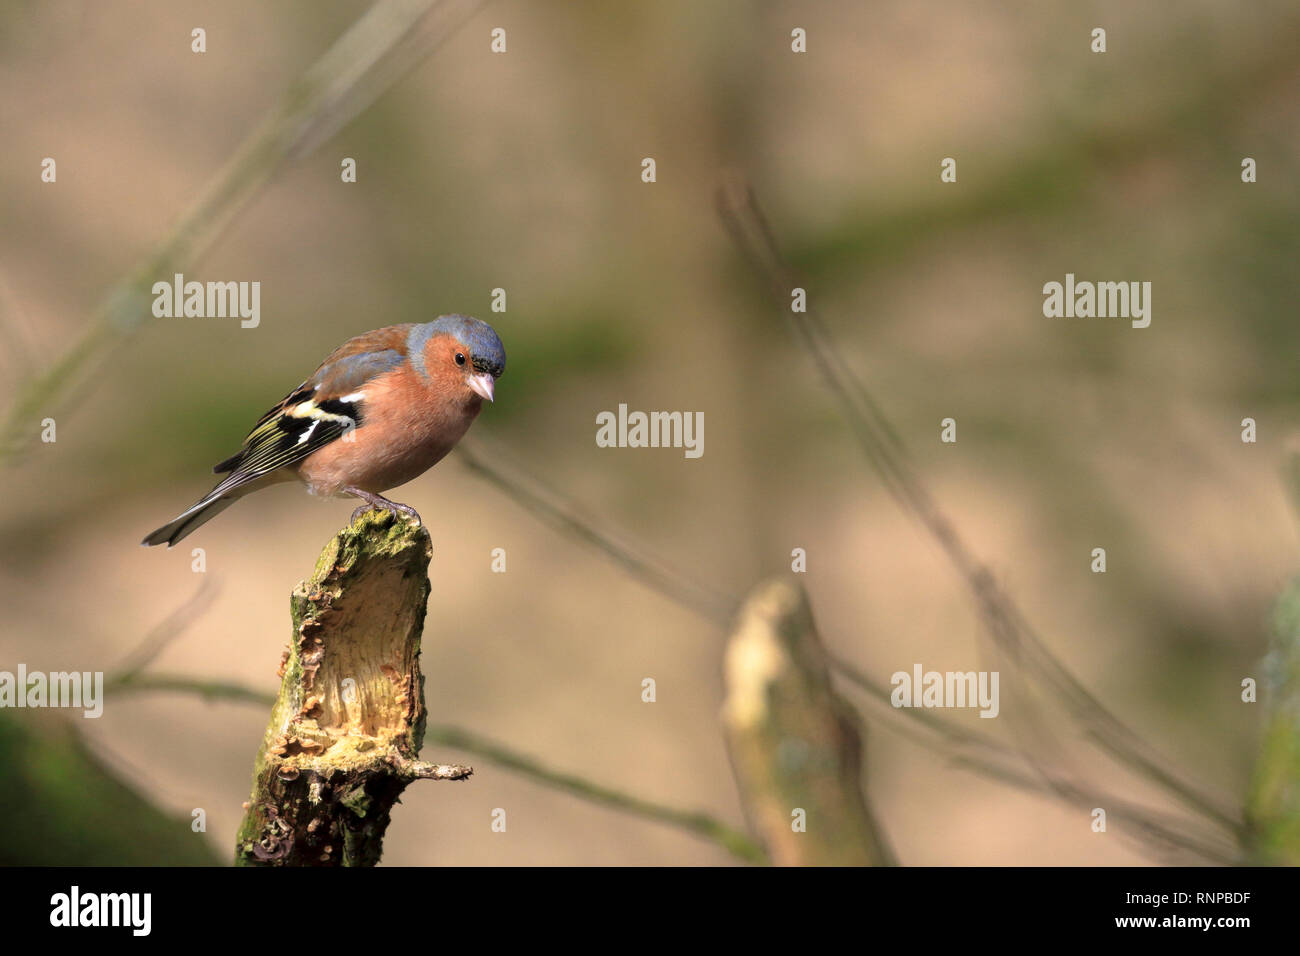 Adult male Chaffinch, Fringilla coelebs perched on a decaying branch, England, UK. Stock Photo